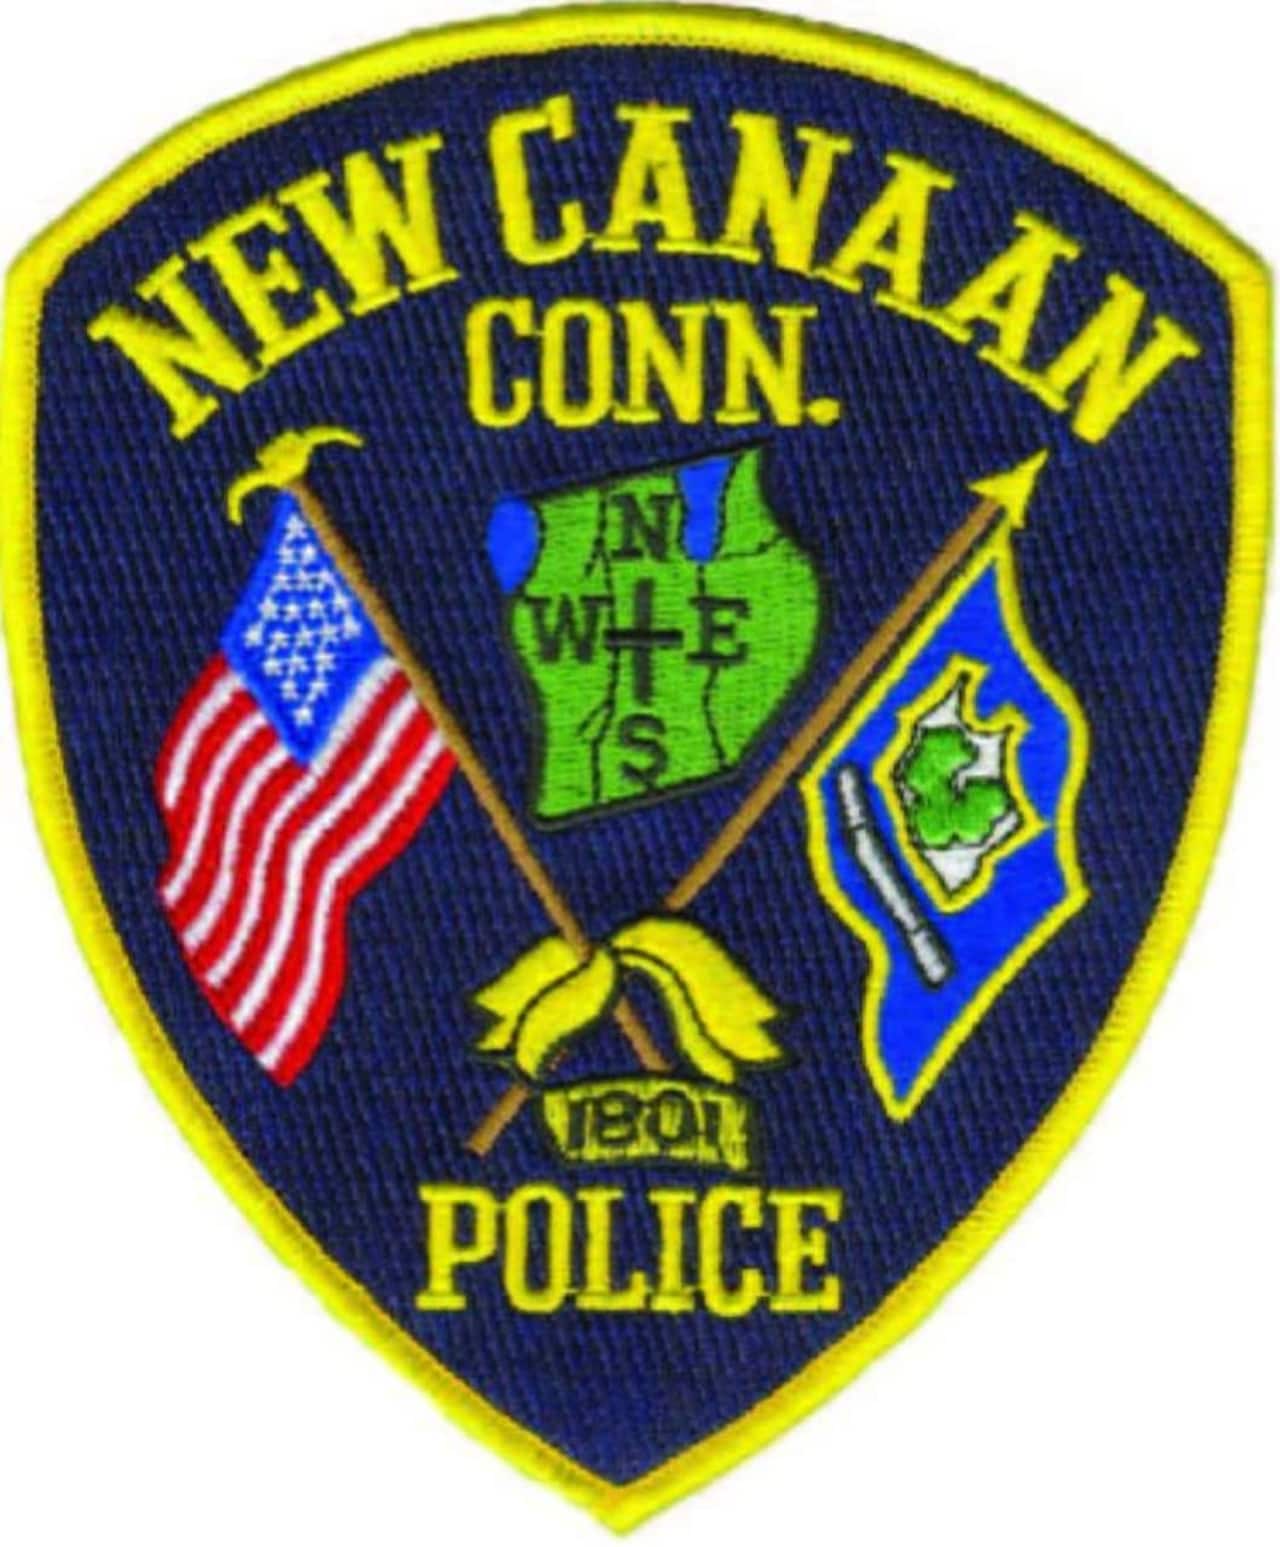 New Canaan Police arrest a man six weeks after traffic incident.